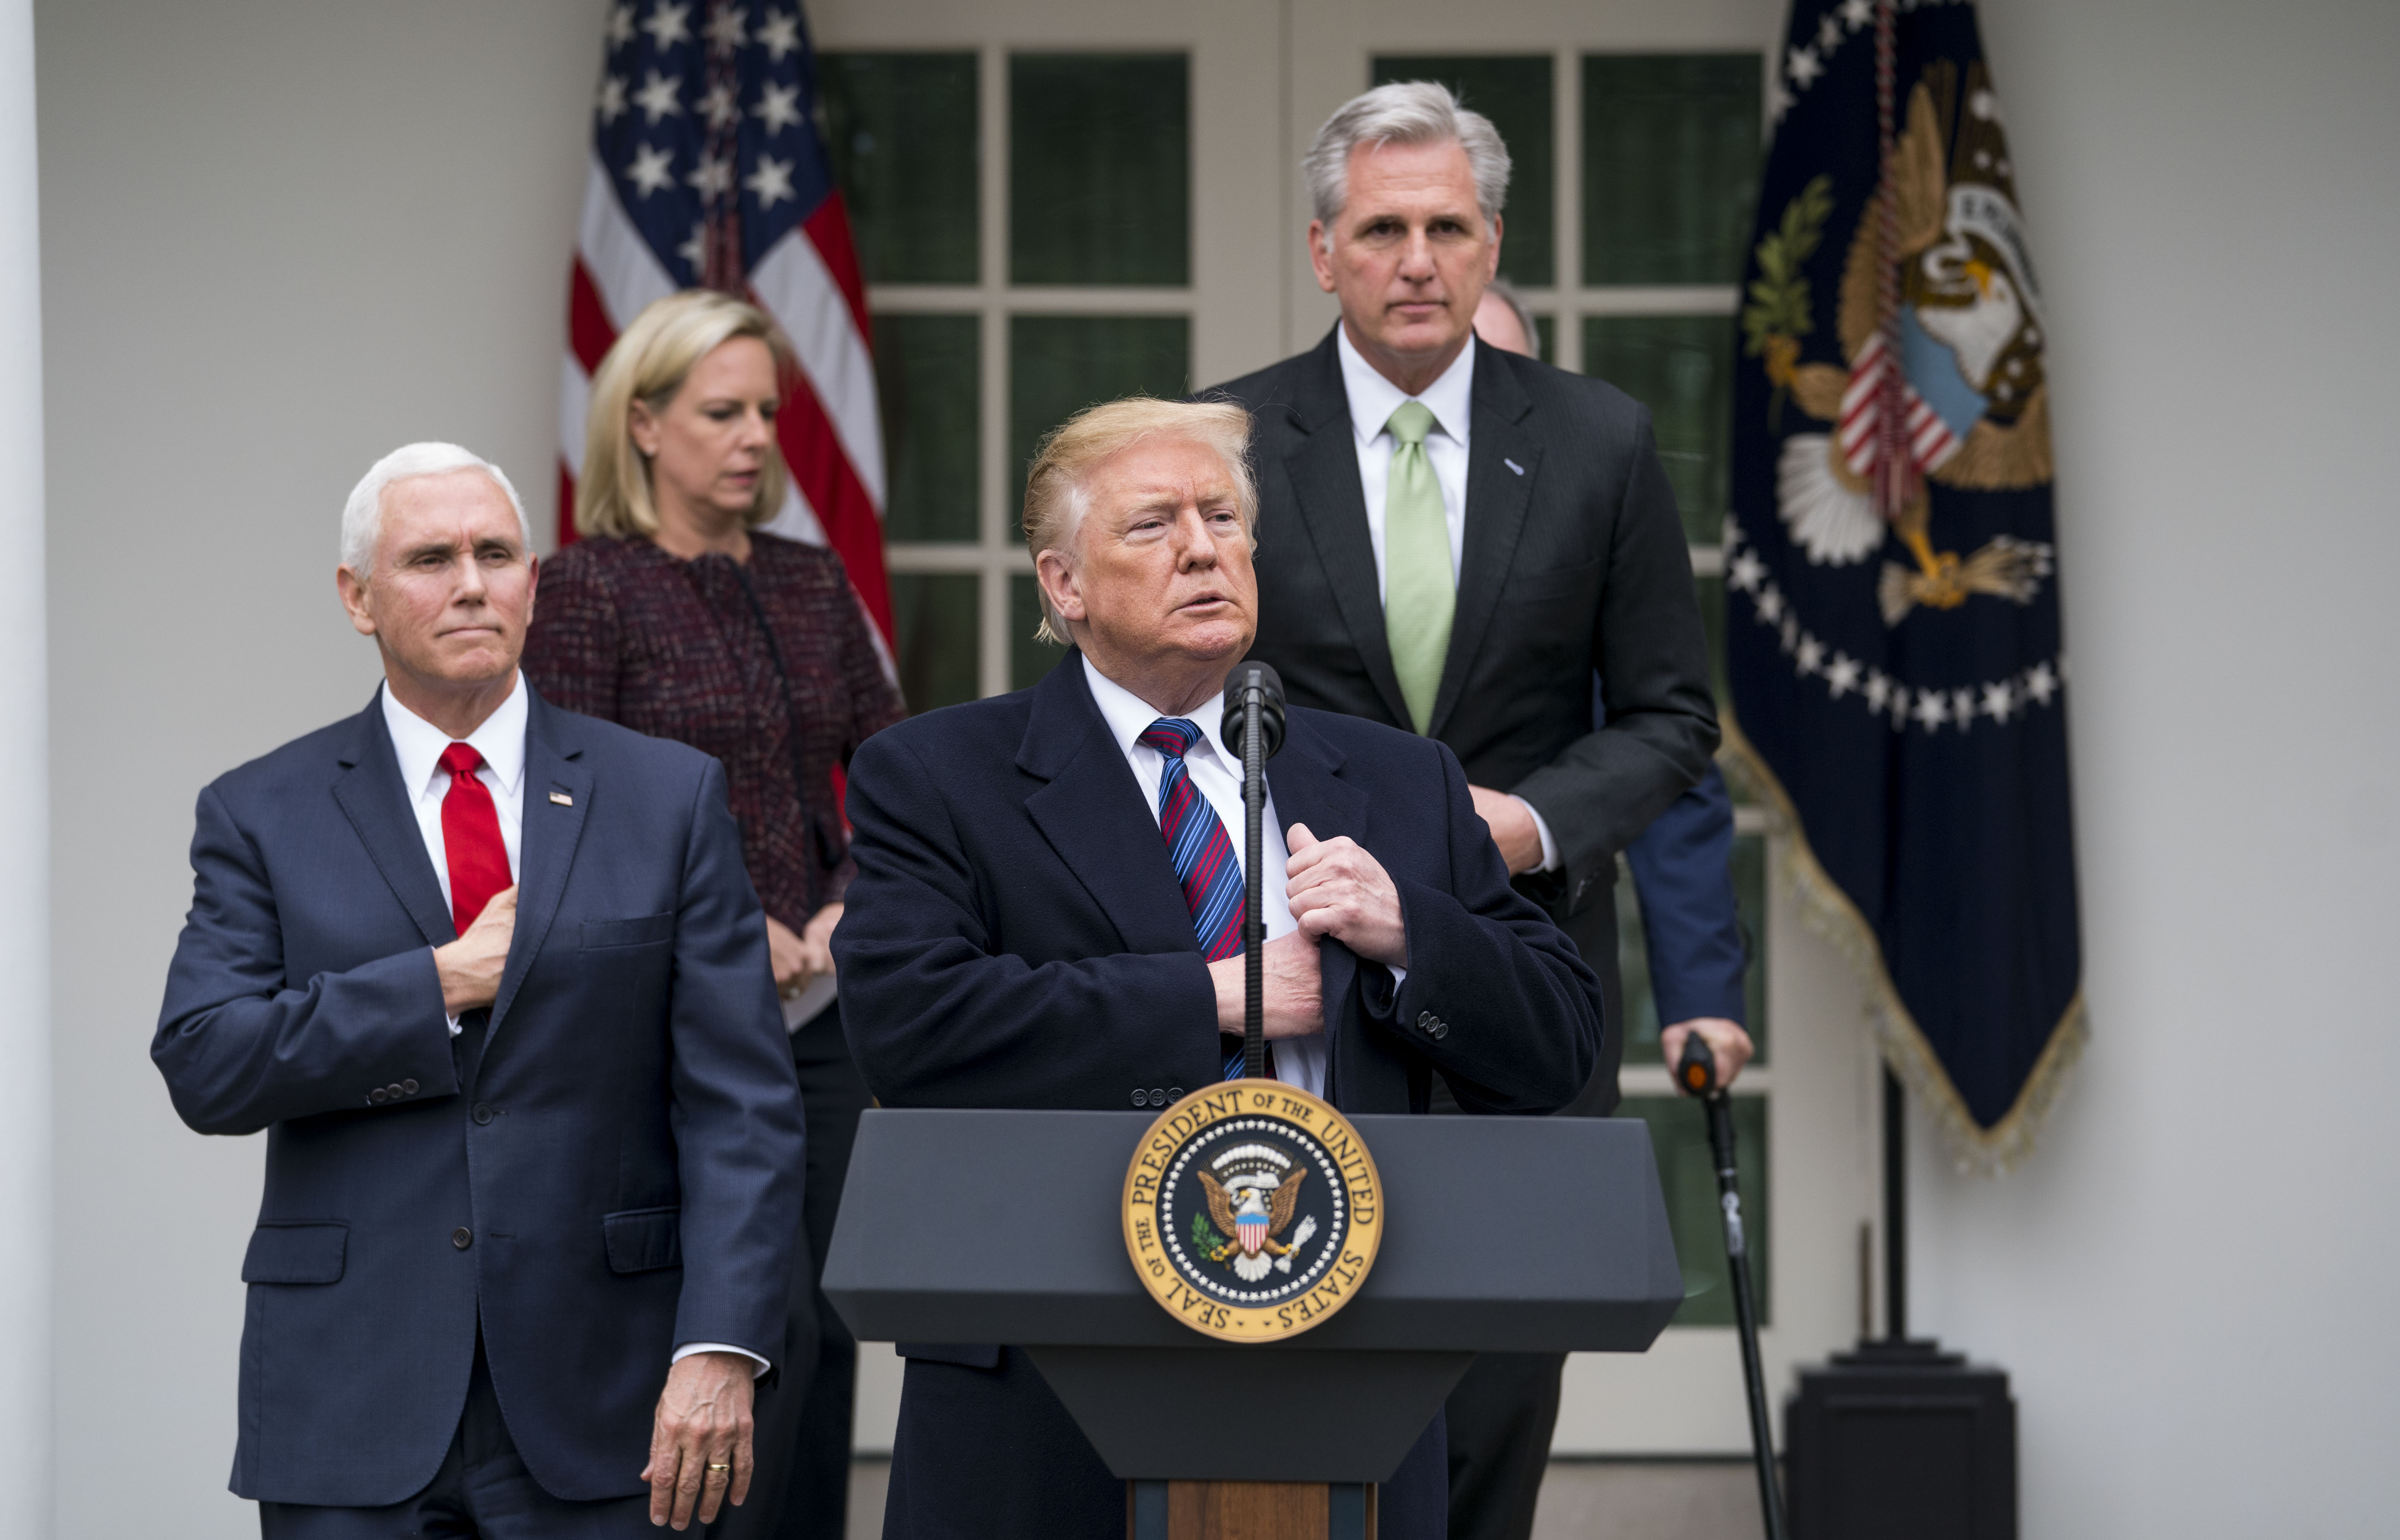 Donald Trump speaks at a news conference after a meeting with Democrats regarding the partial government shutdown, at the White House on Friday.